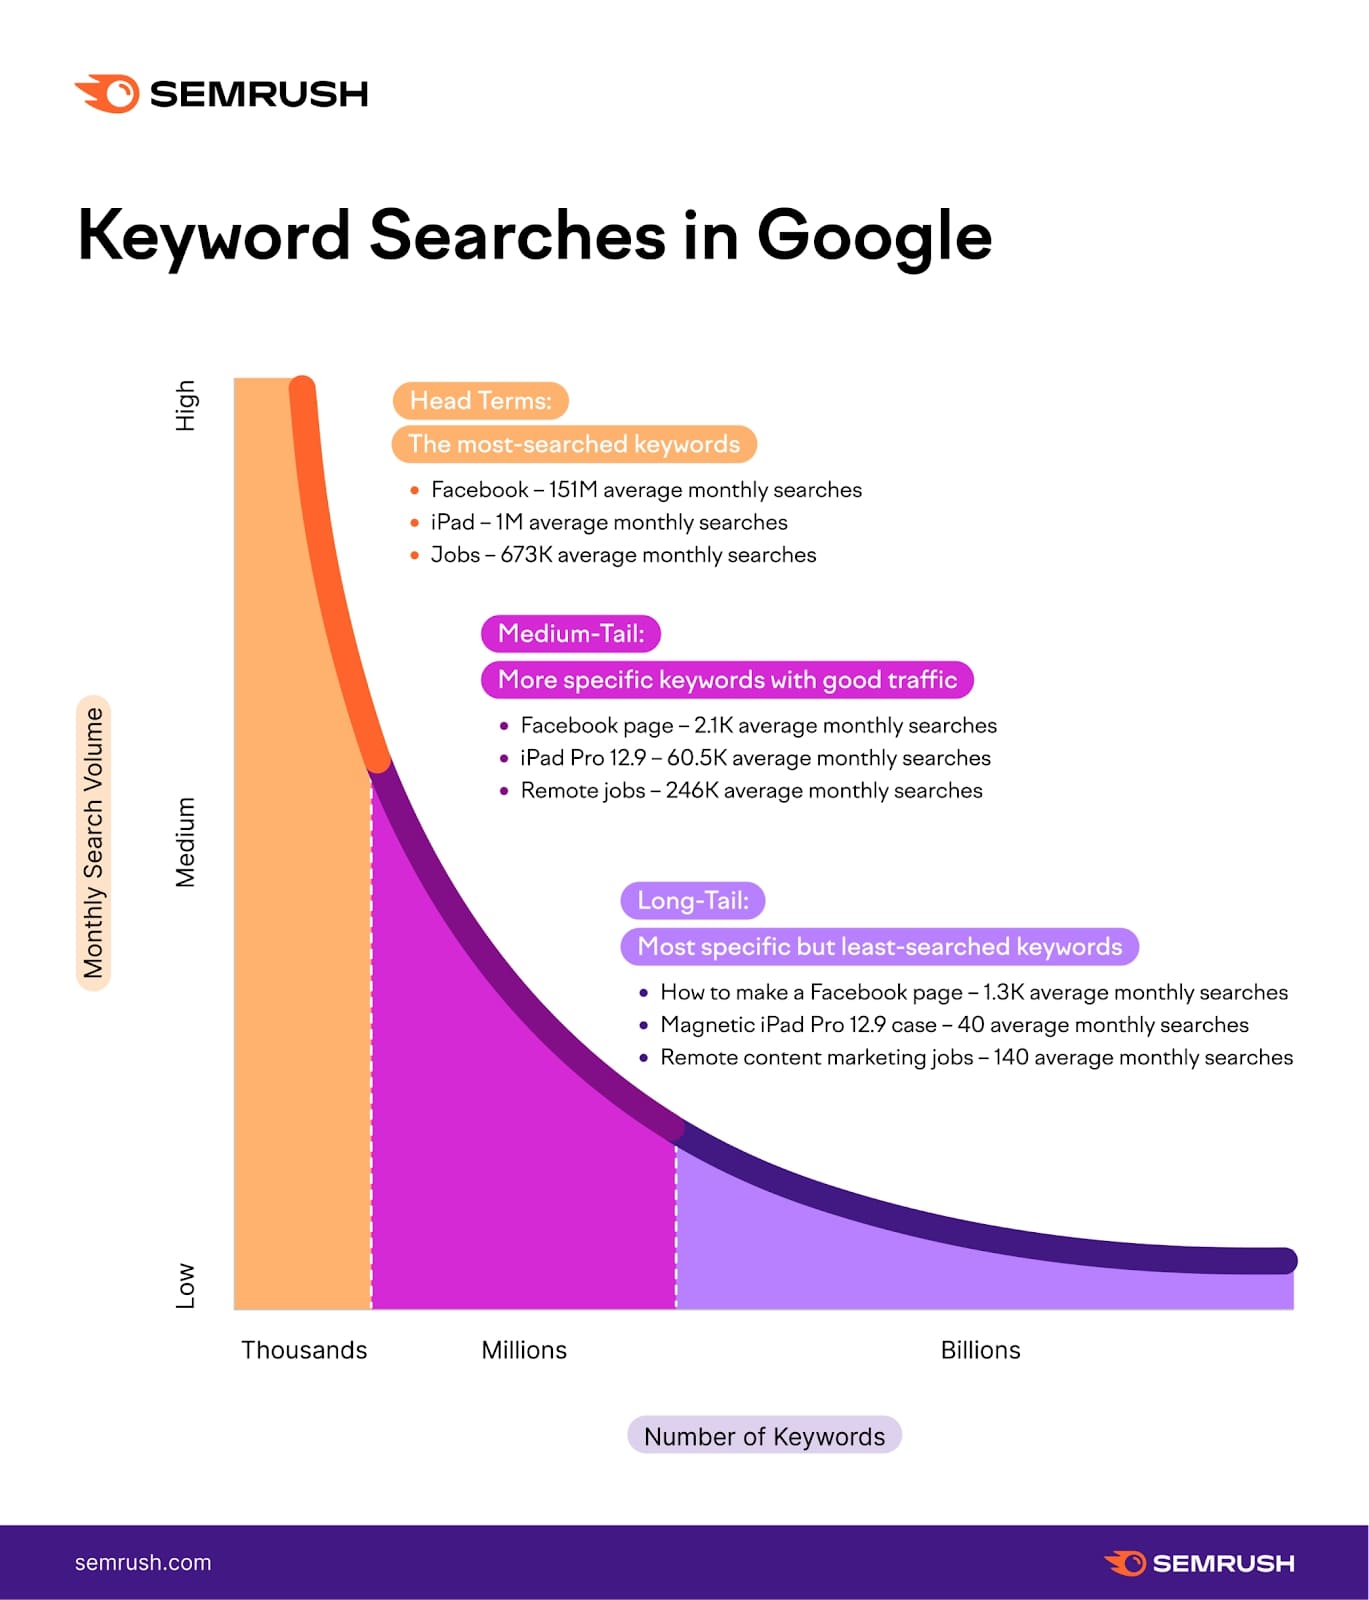 A graph showing keyword searches in Google, based on the number of keywords and monthly search volume